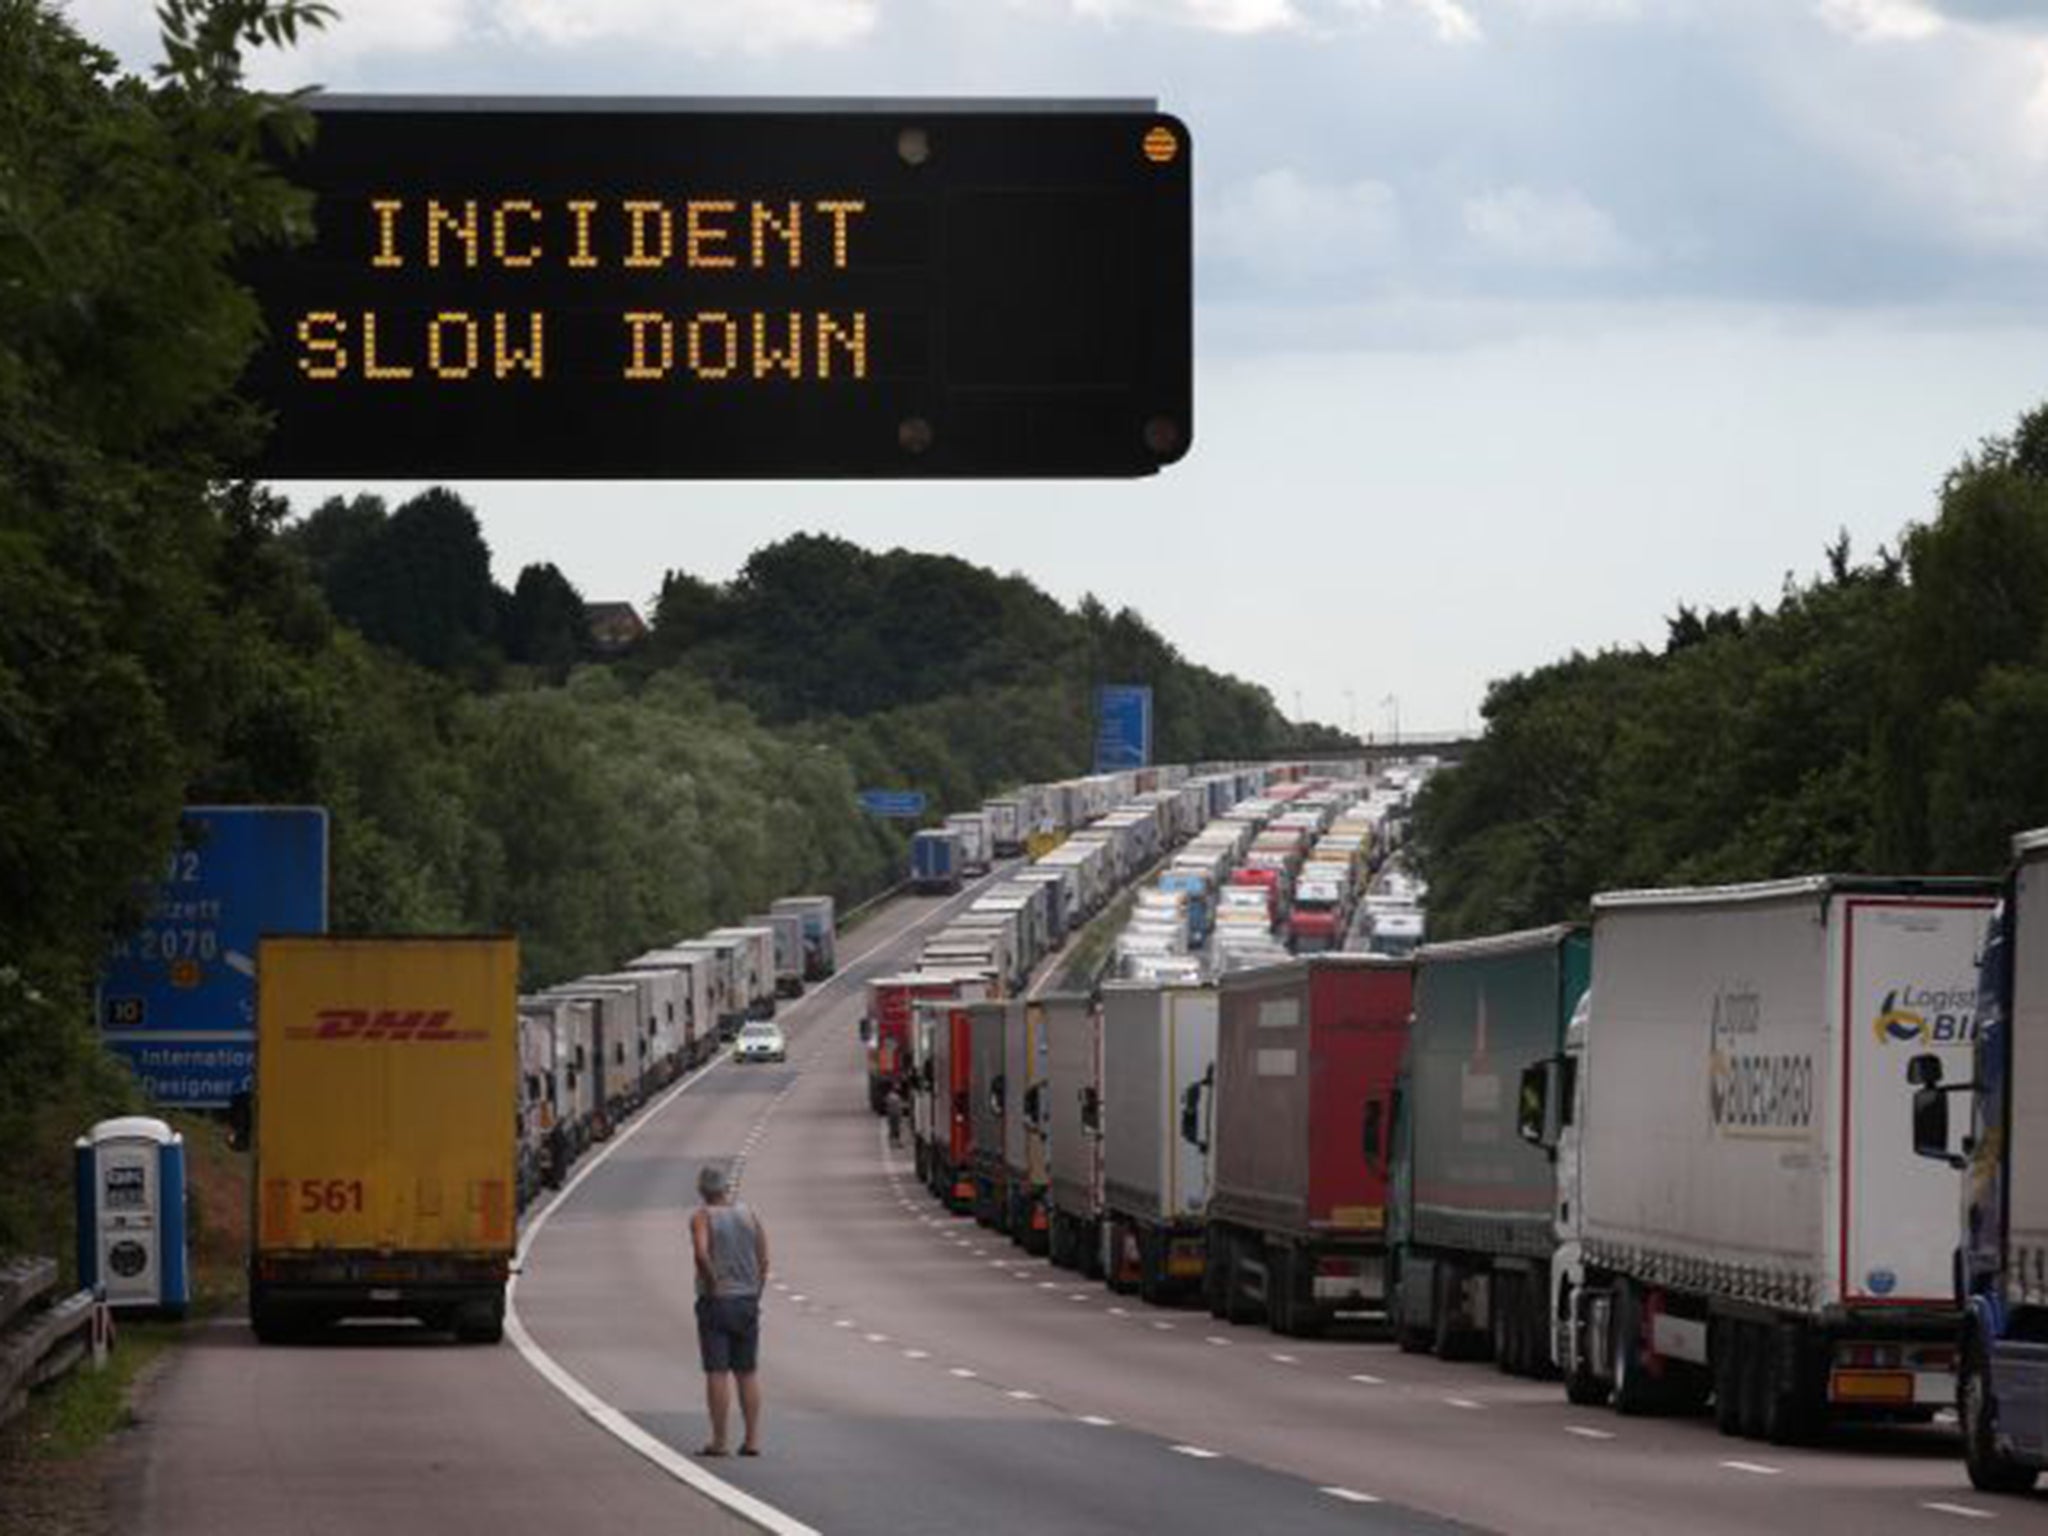 In Kent, some 6,000 lorries remain in Operation Stack, awaiting passage to France after days of disruption